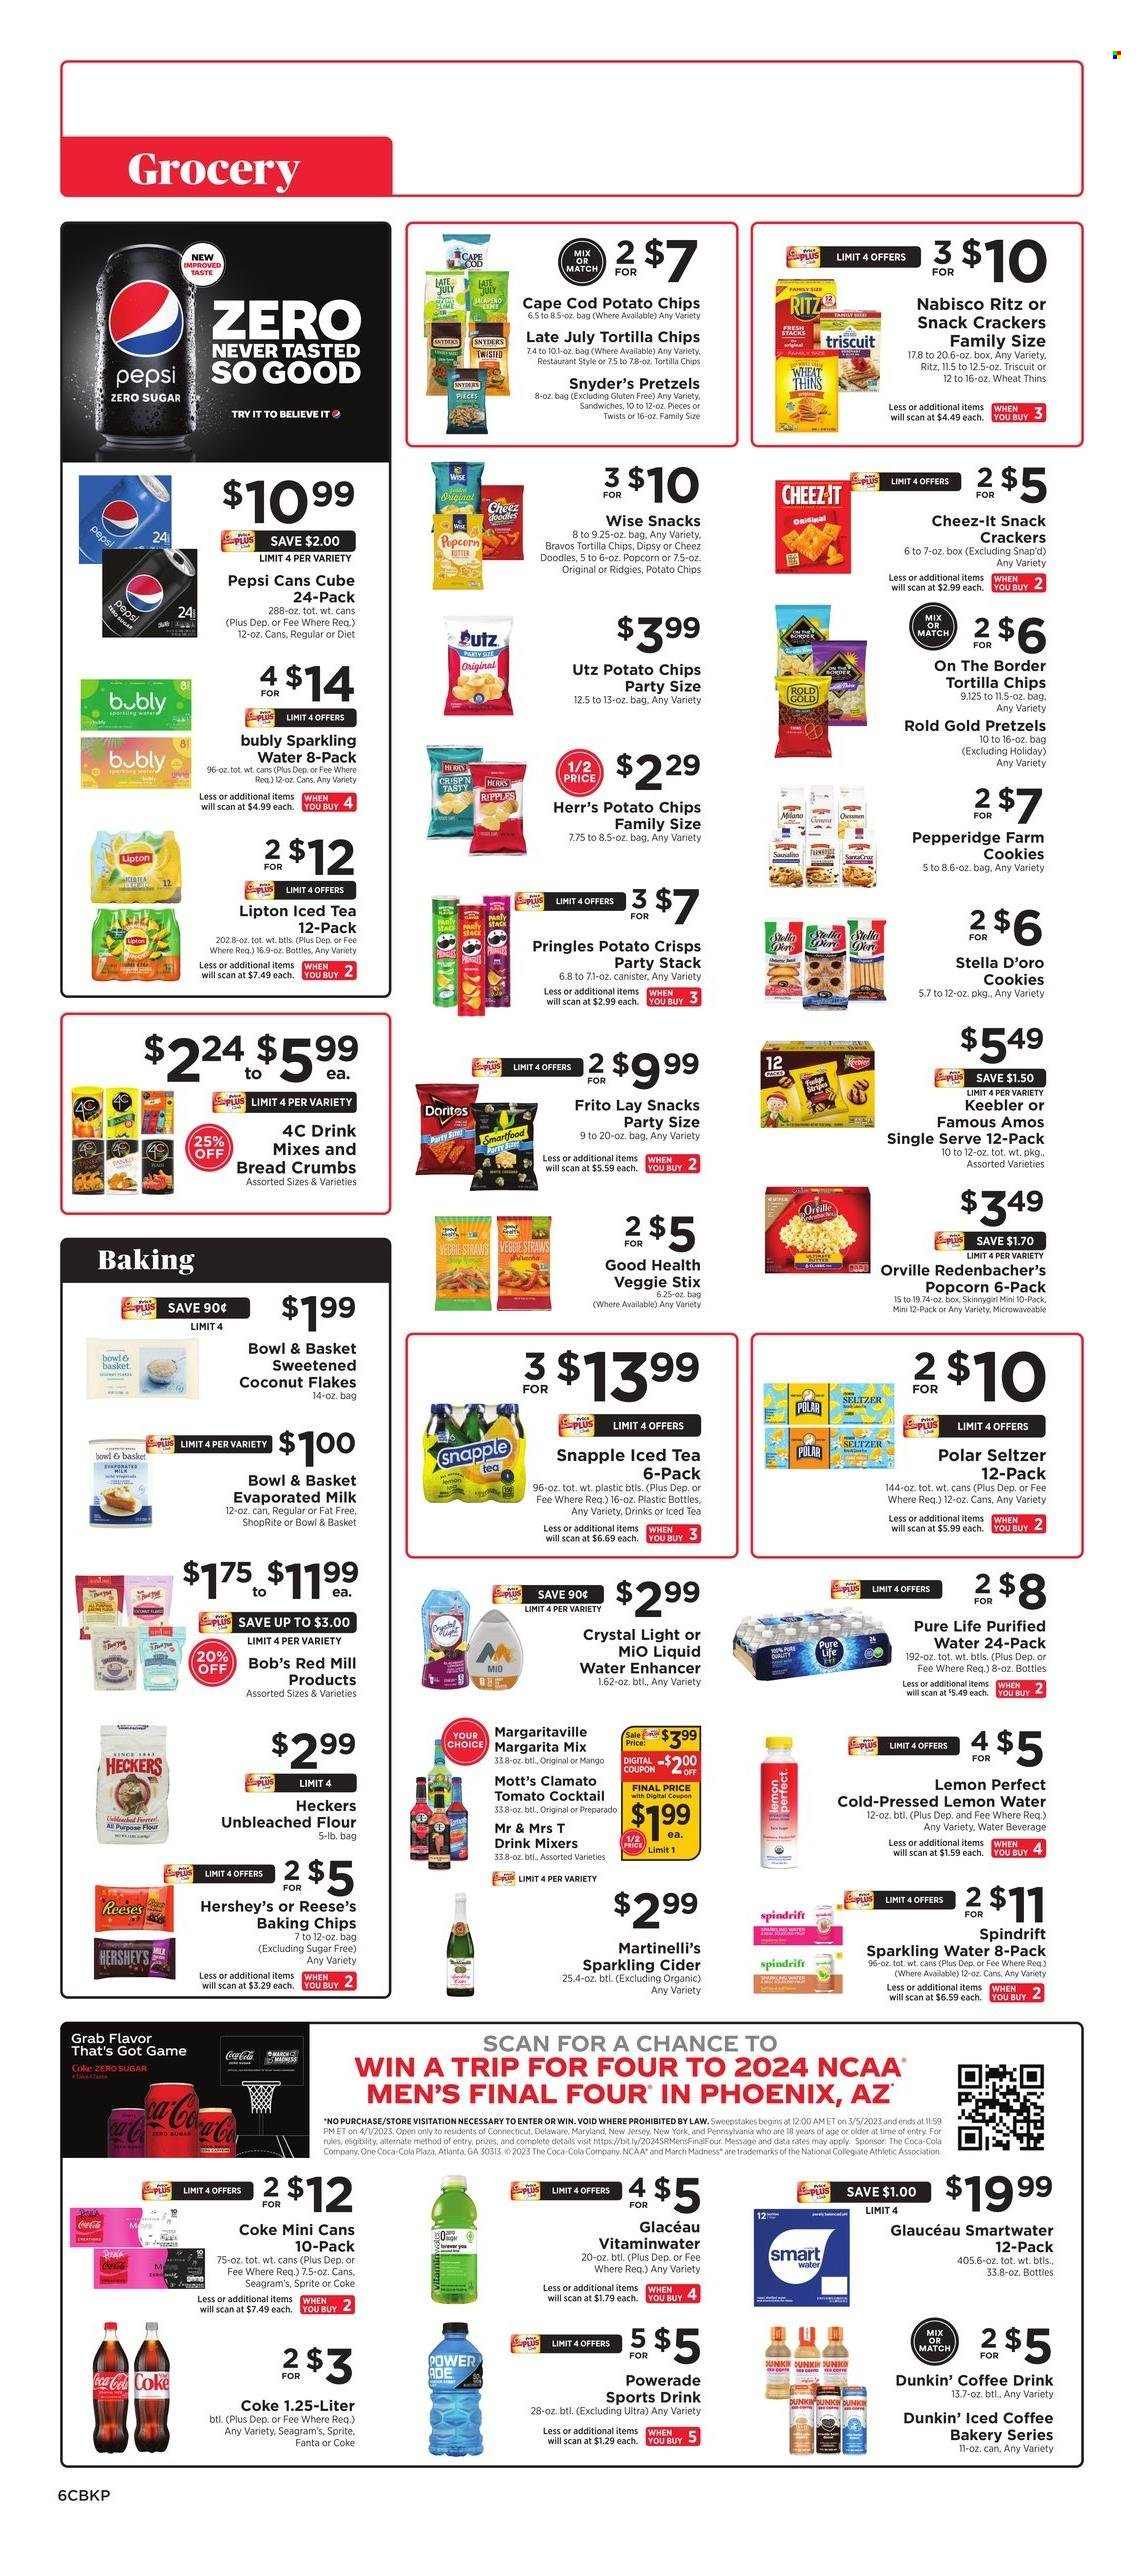 thumbnail - ShopRite Flyer - 03/26/2023 - 04/01/2023 - Sales products - pretzels, Bowl & Basket, breadcrumbs, Mott's, cod, sandwich, evaporated milk, Reese's, Hershey's, cookies, crackers, Keebler, RITZ, tortilla chips, potato crisps, potato chips, Pringles, Thins, popcorn, Cheez-It, all purpose flour, baking chips, flaked coconut, Coca-Cola, Sprite, Powerade, Pepsi, Fanta, Lipton, ice tea, Clamato, Coca-Cola zero, Snapple, Spindrift, Coke, seltzer water, sparkling water, purified water, Smartwater, water, Margarita Mix, iced coffee, sparkling cider, sparkling wine, cider, Paws. Page 6.